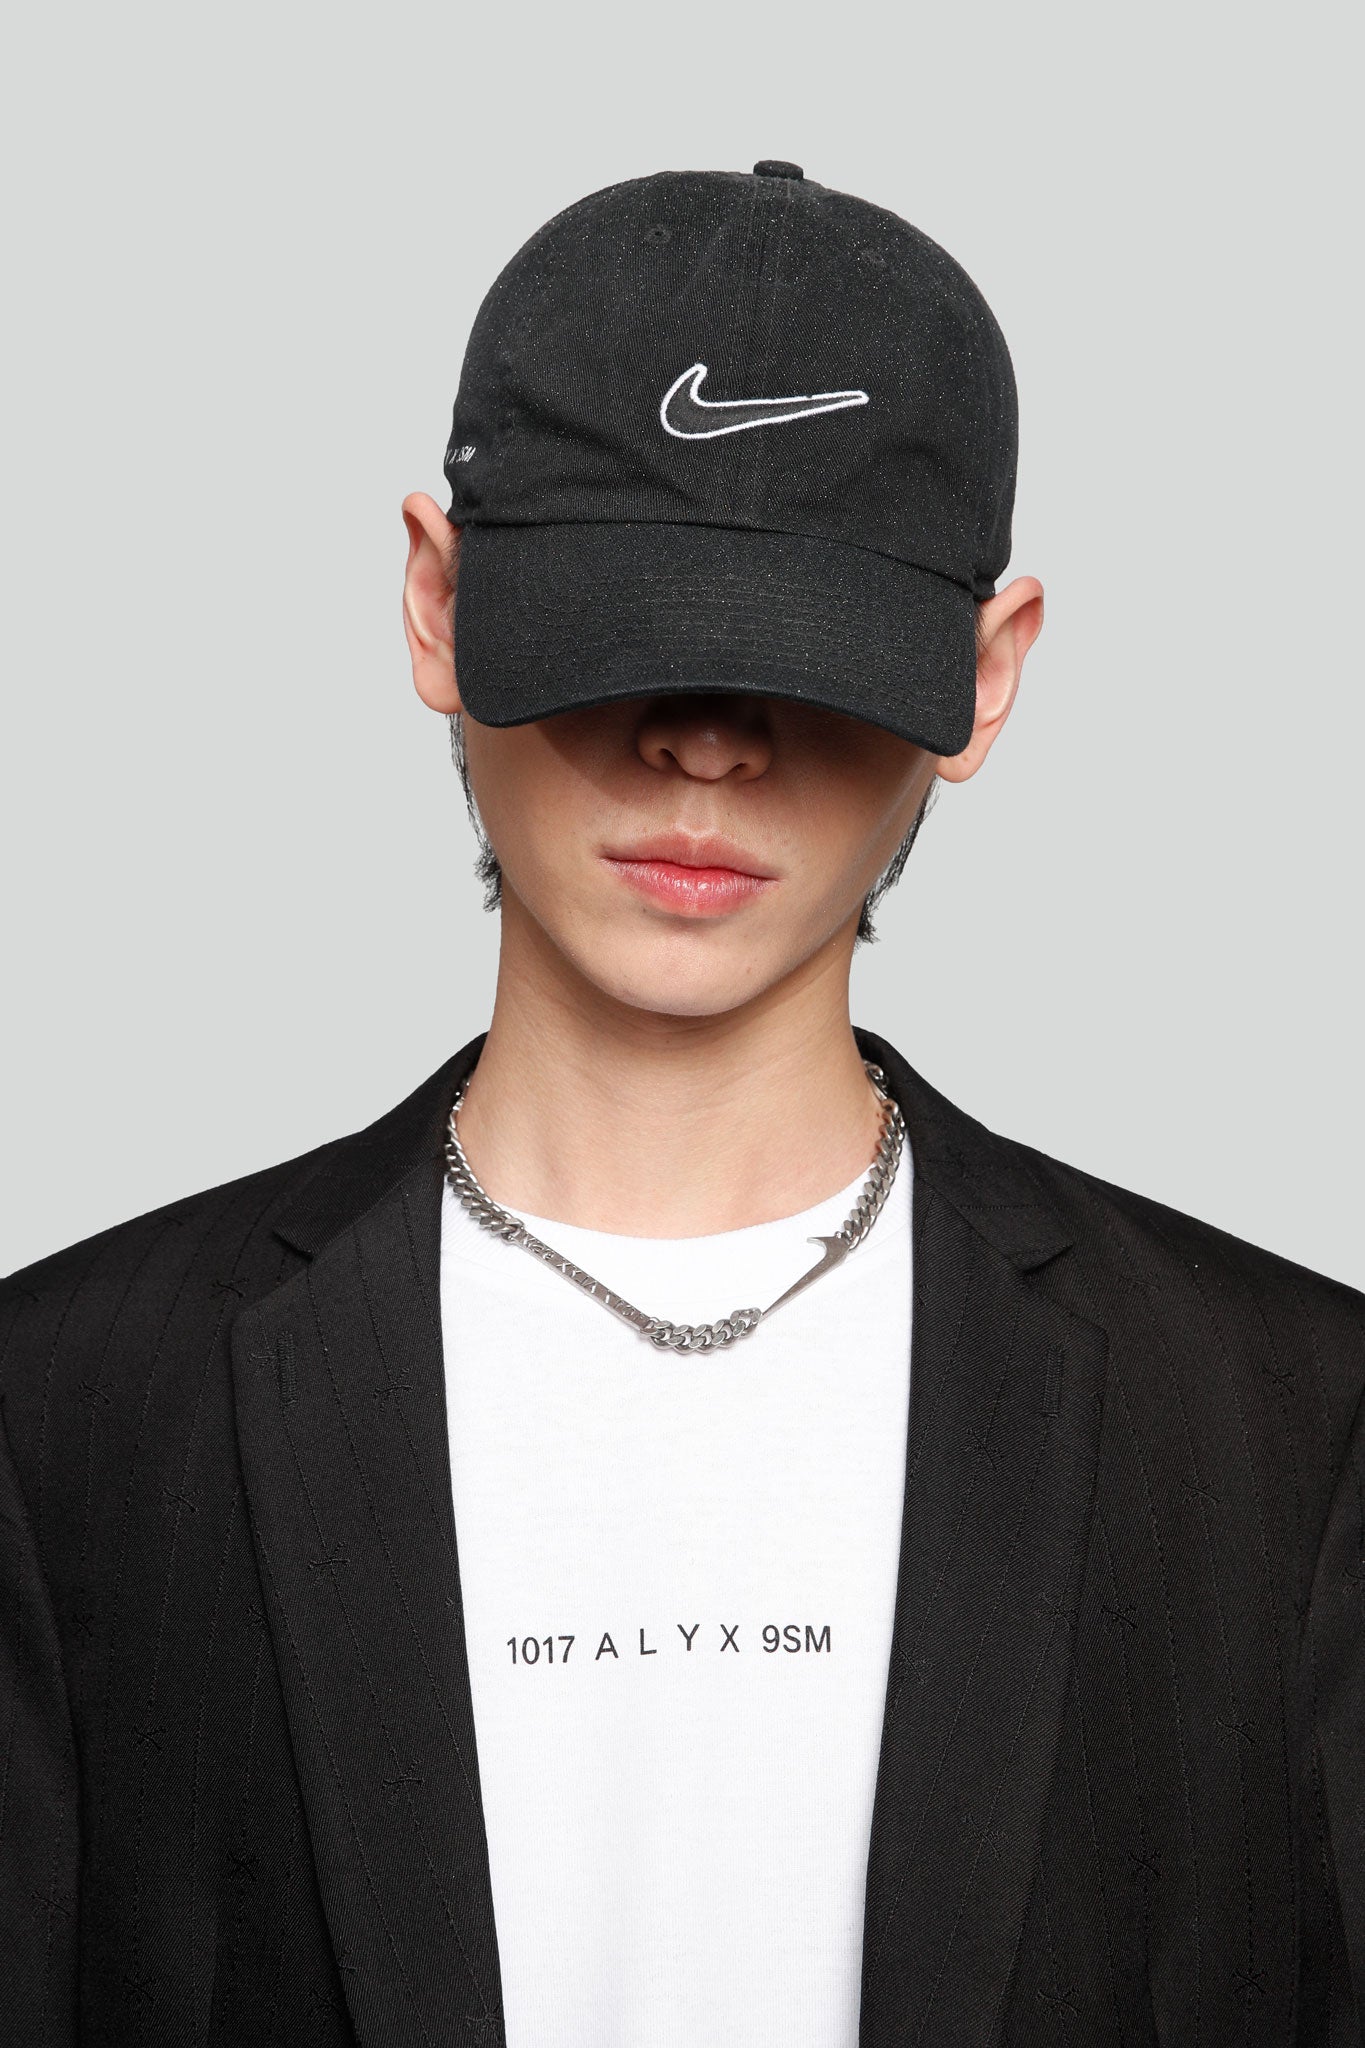 alyx nike hatte promo code for 05c62 a1267